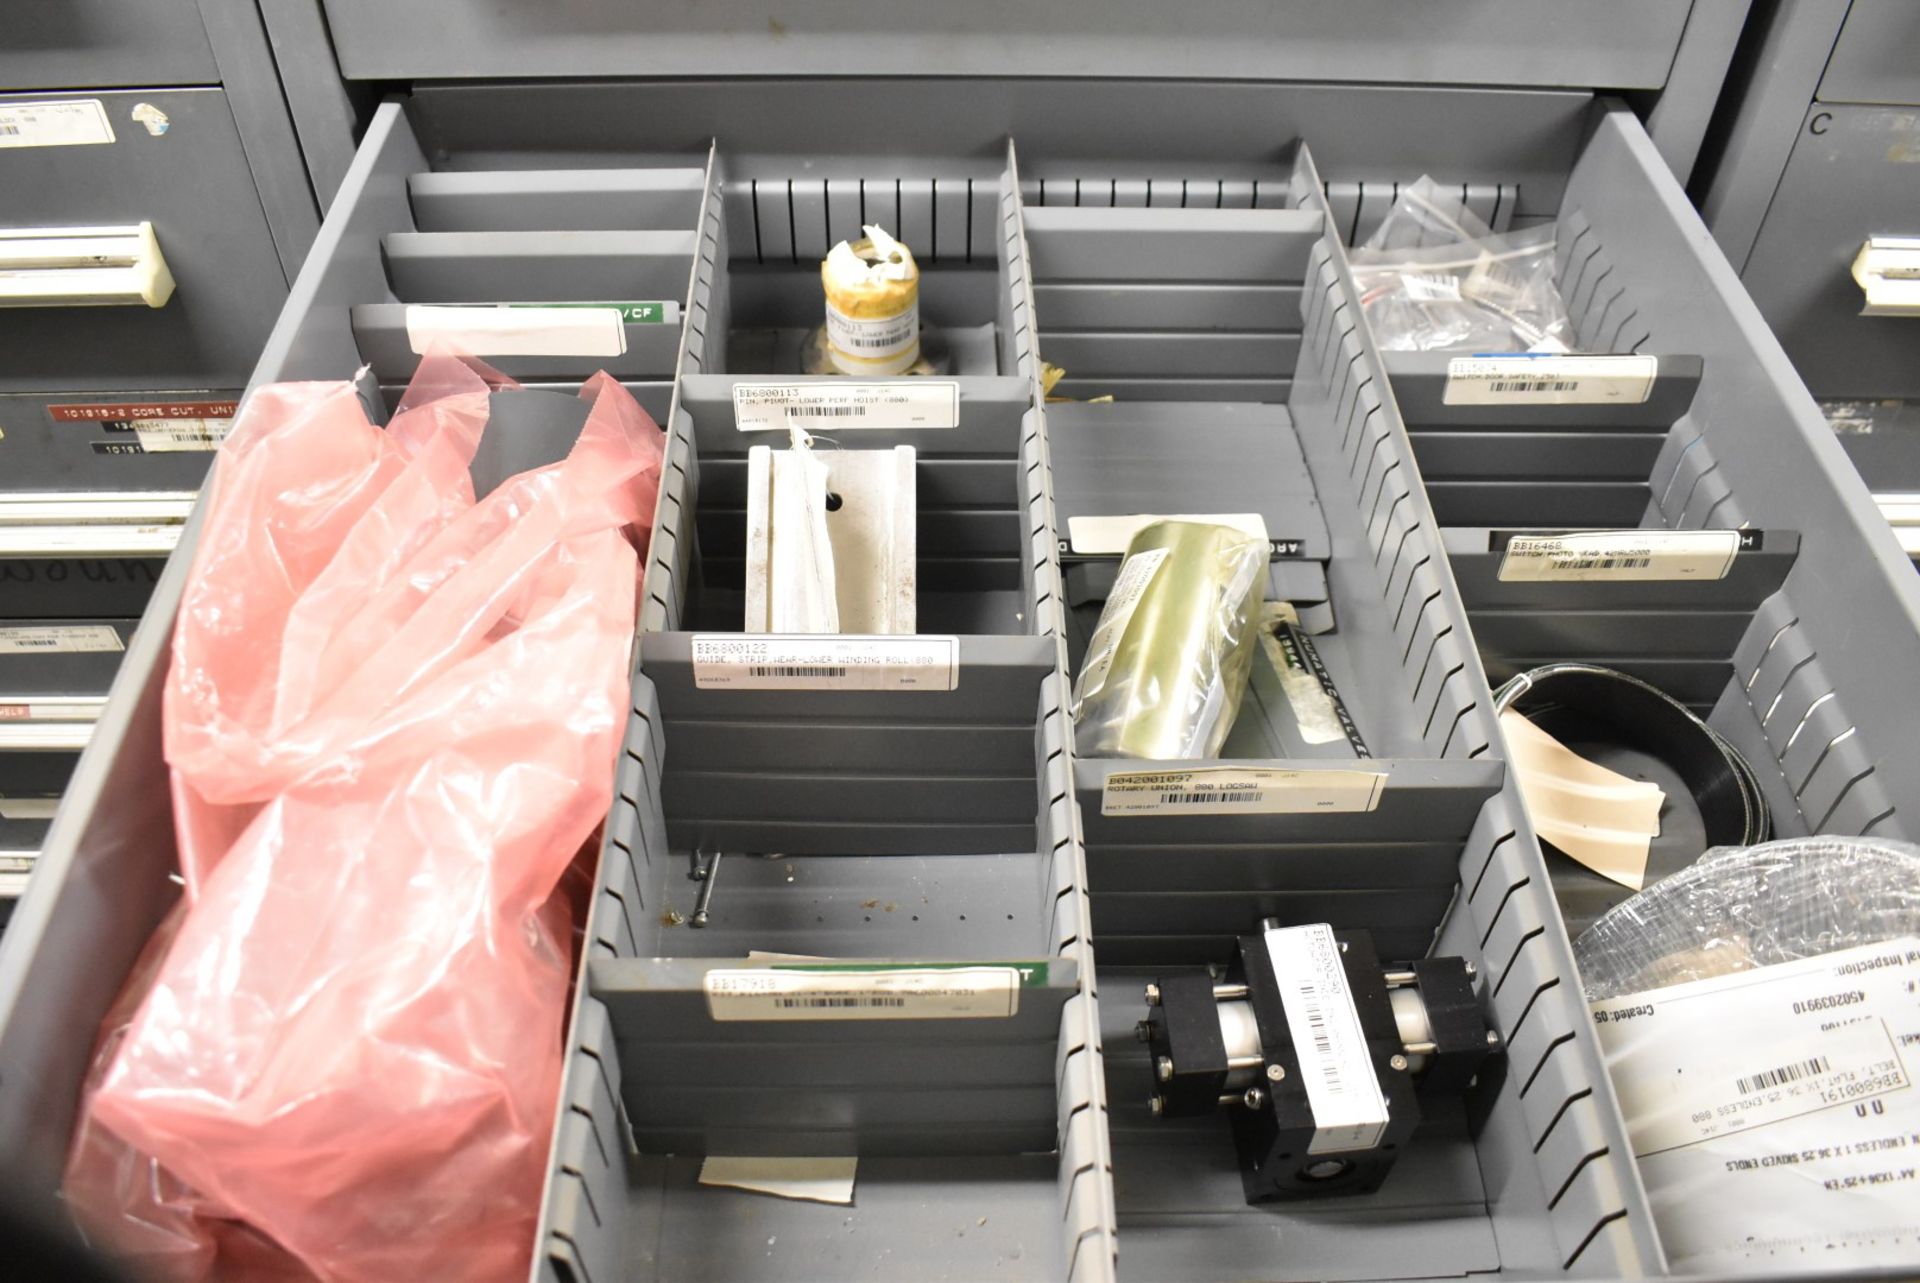 LOT/ CONTENTS OF CABINET - SALWASSER SPARE PARTS & COMPONENTS (TOOL CABINET NOT INCLUDED) [RIGGING - Image 4 of 8